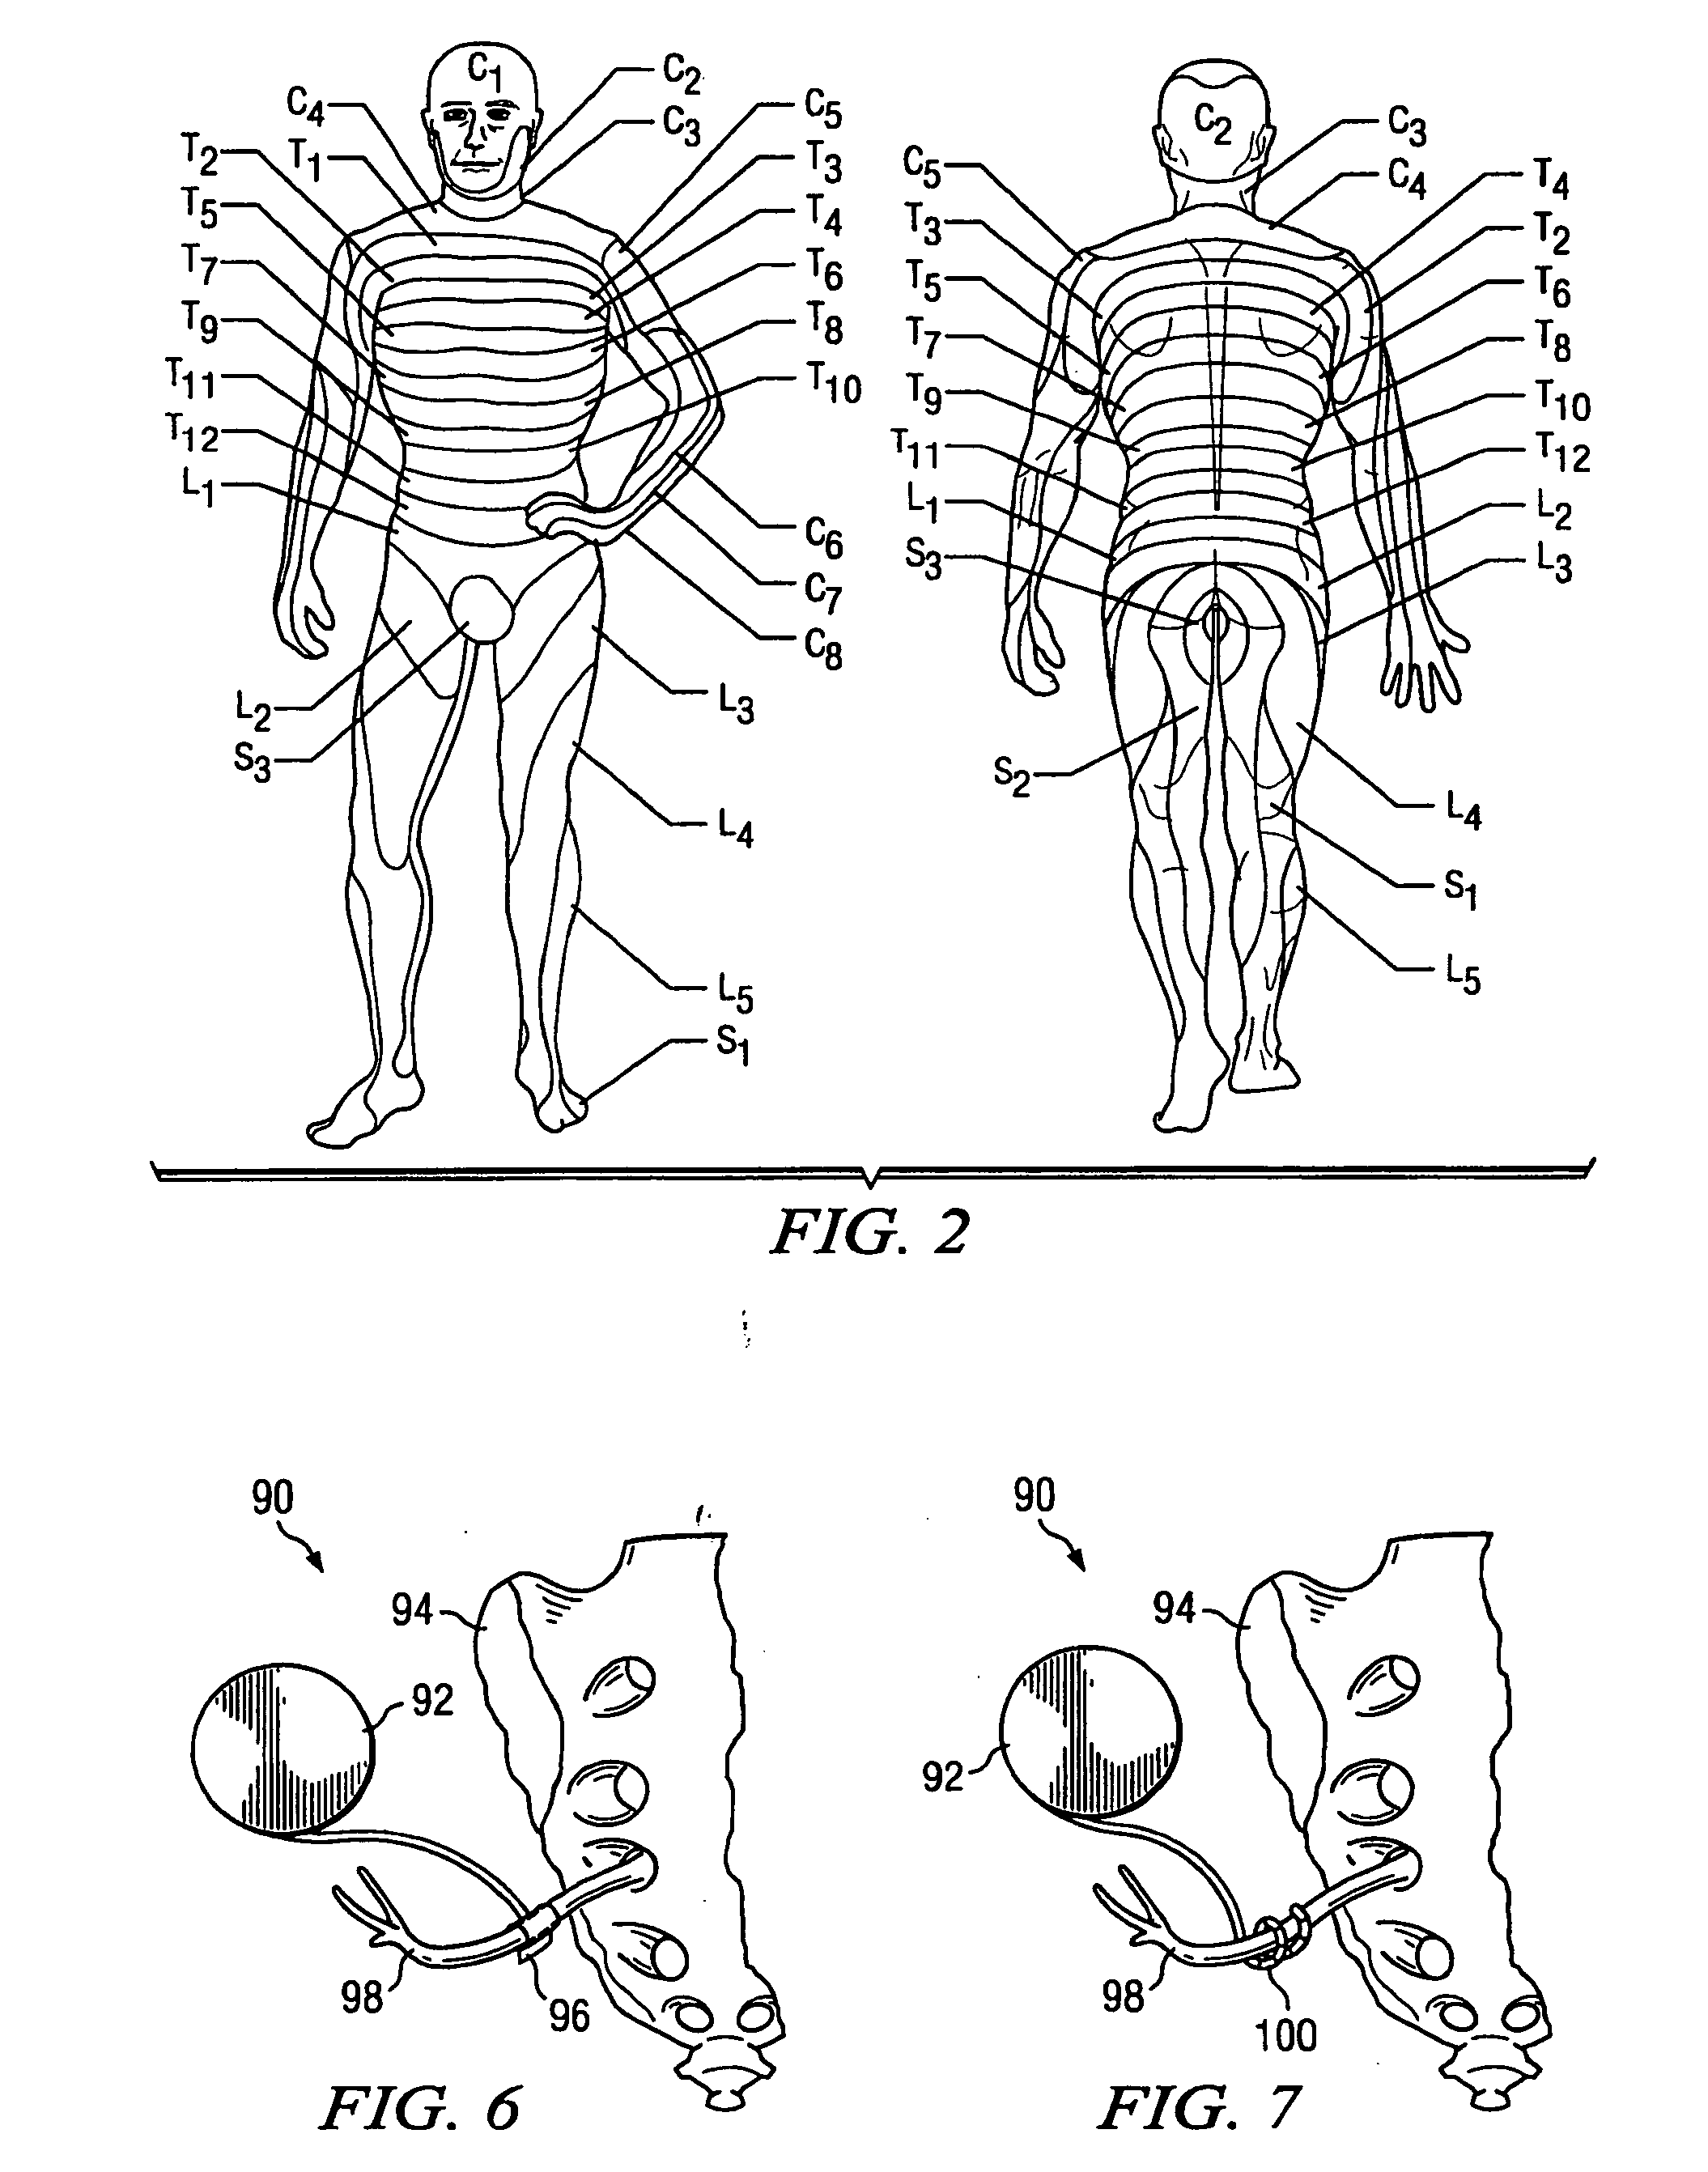 System and method for treatment of sexual dysfunction